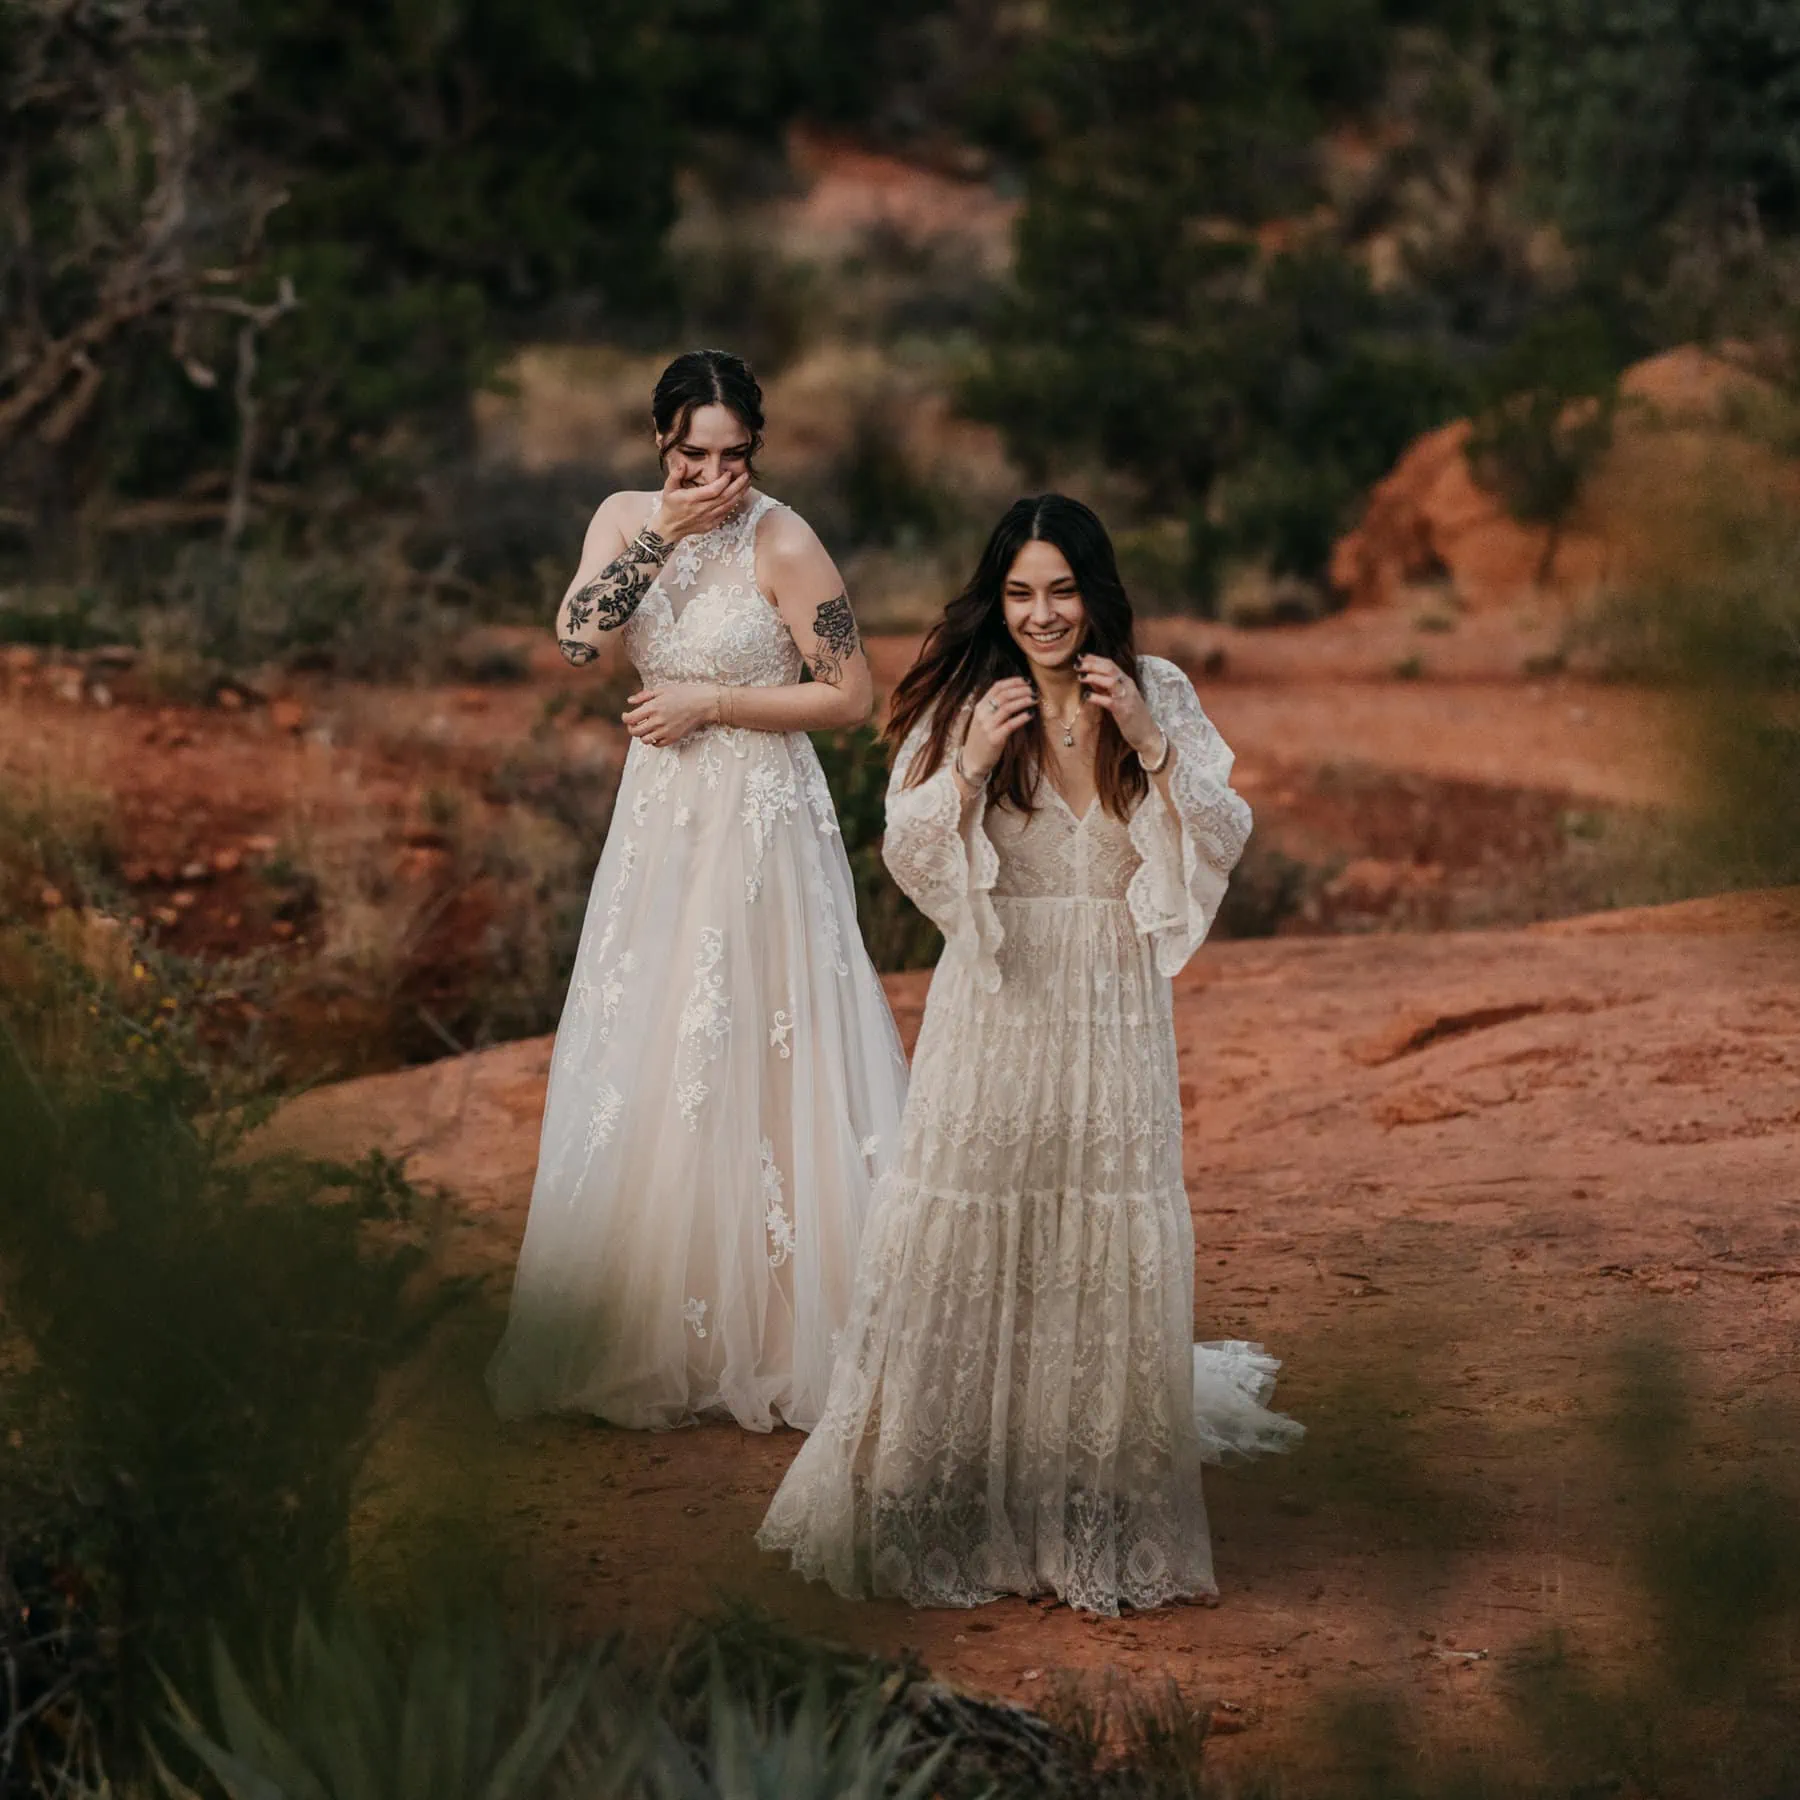 Two brides share a first look in the desert together.